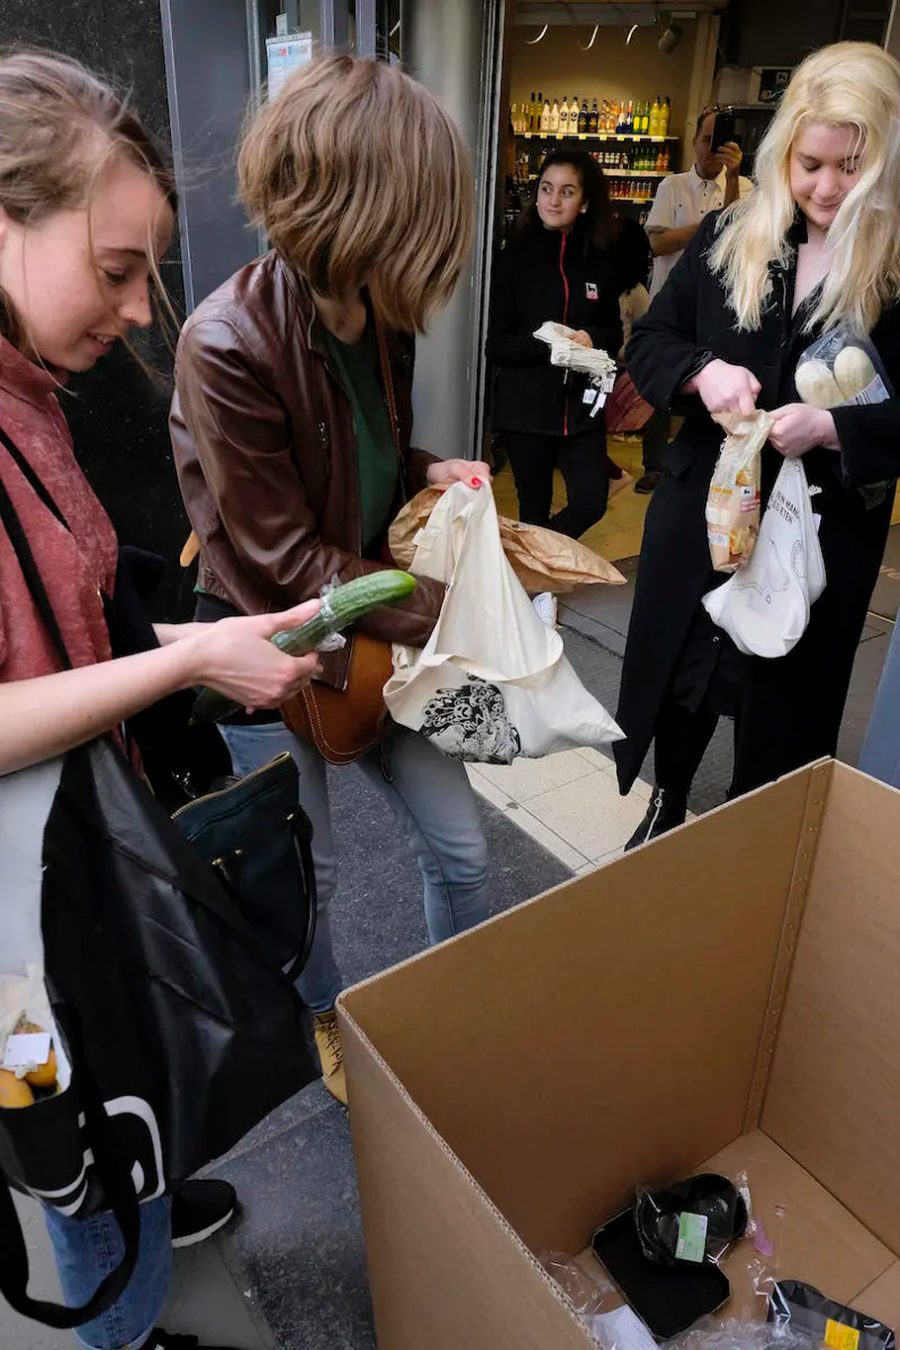 Shoppers leave excess packaging at the entrance to a Brussels, Belgium, supermarket